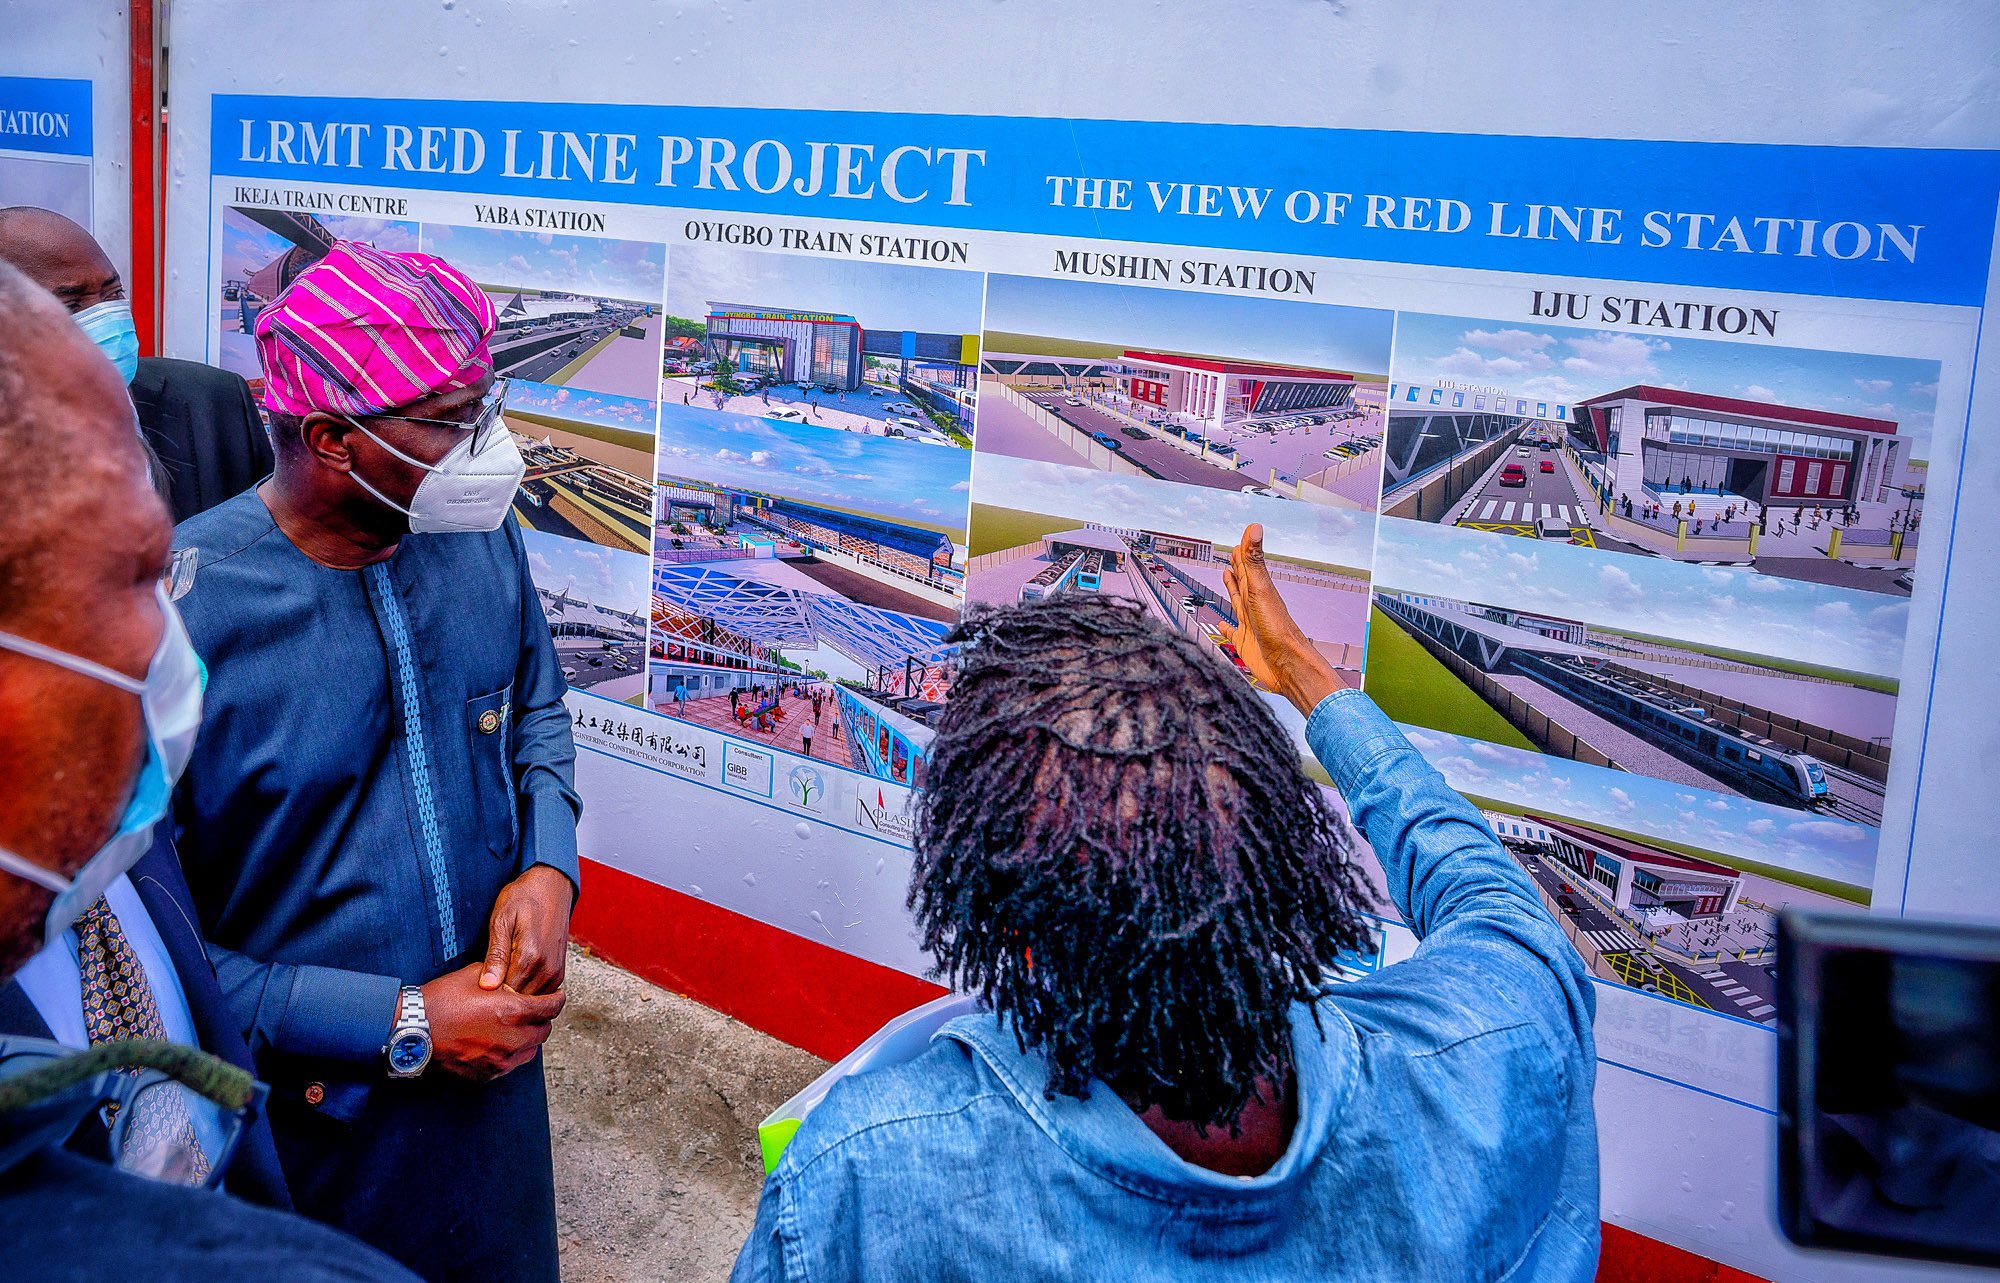 Sanwo-Olu flags-off first phase of the Lagos Rail Mass Transit (LRMT) Red Line project